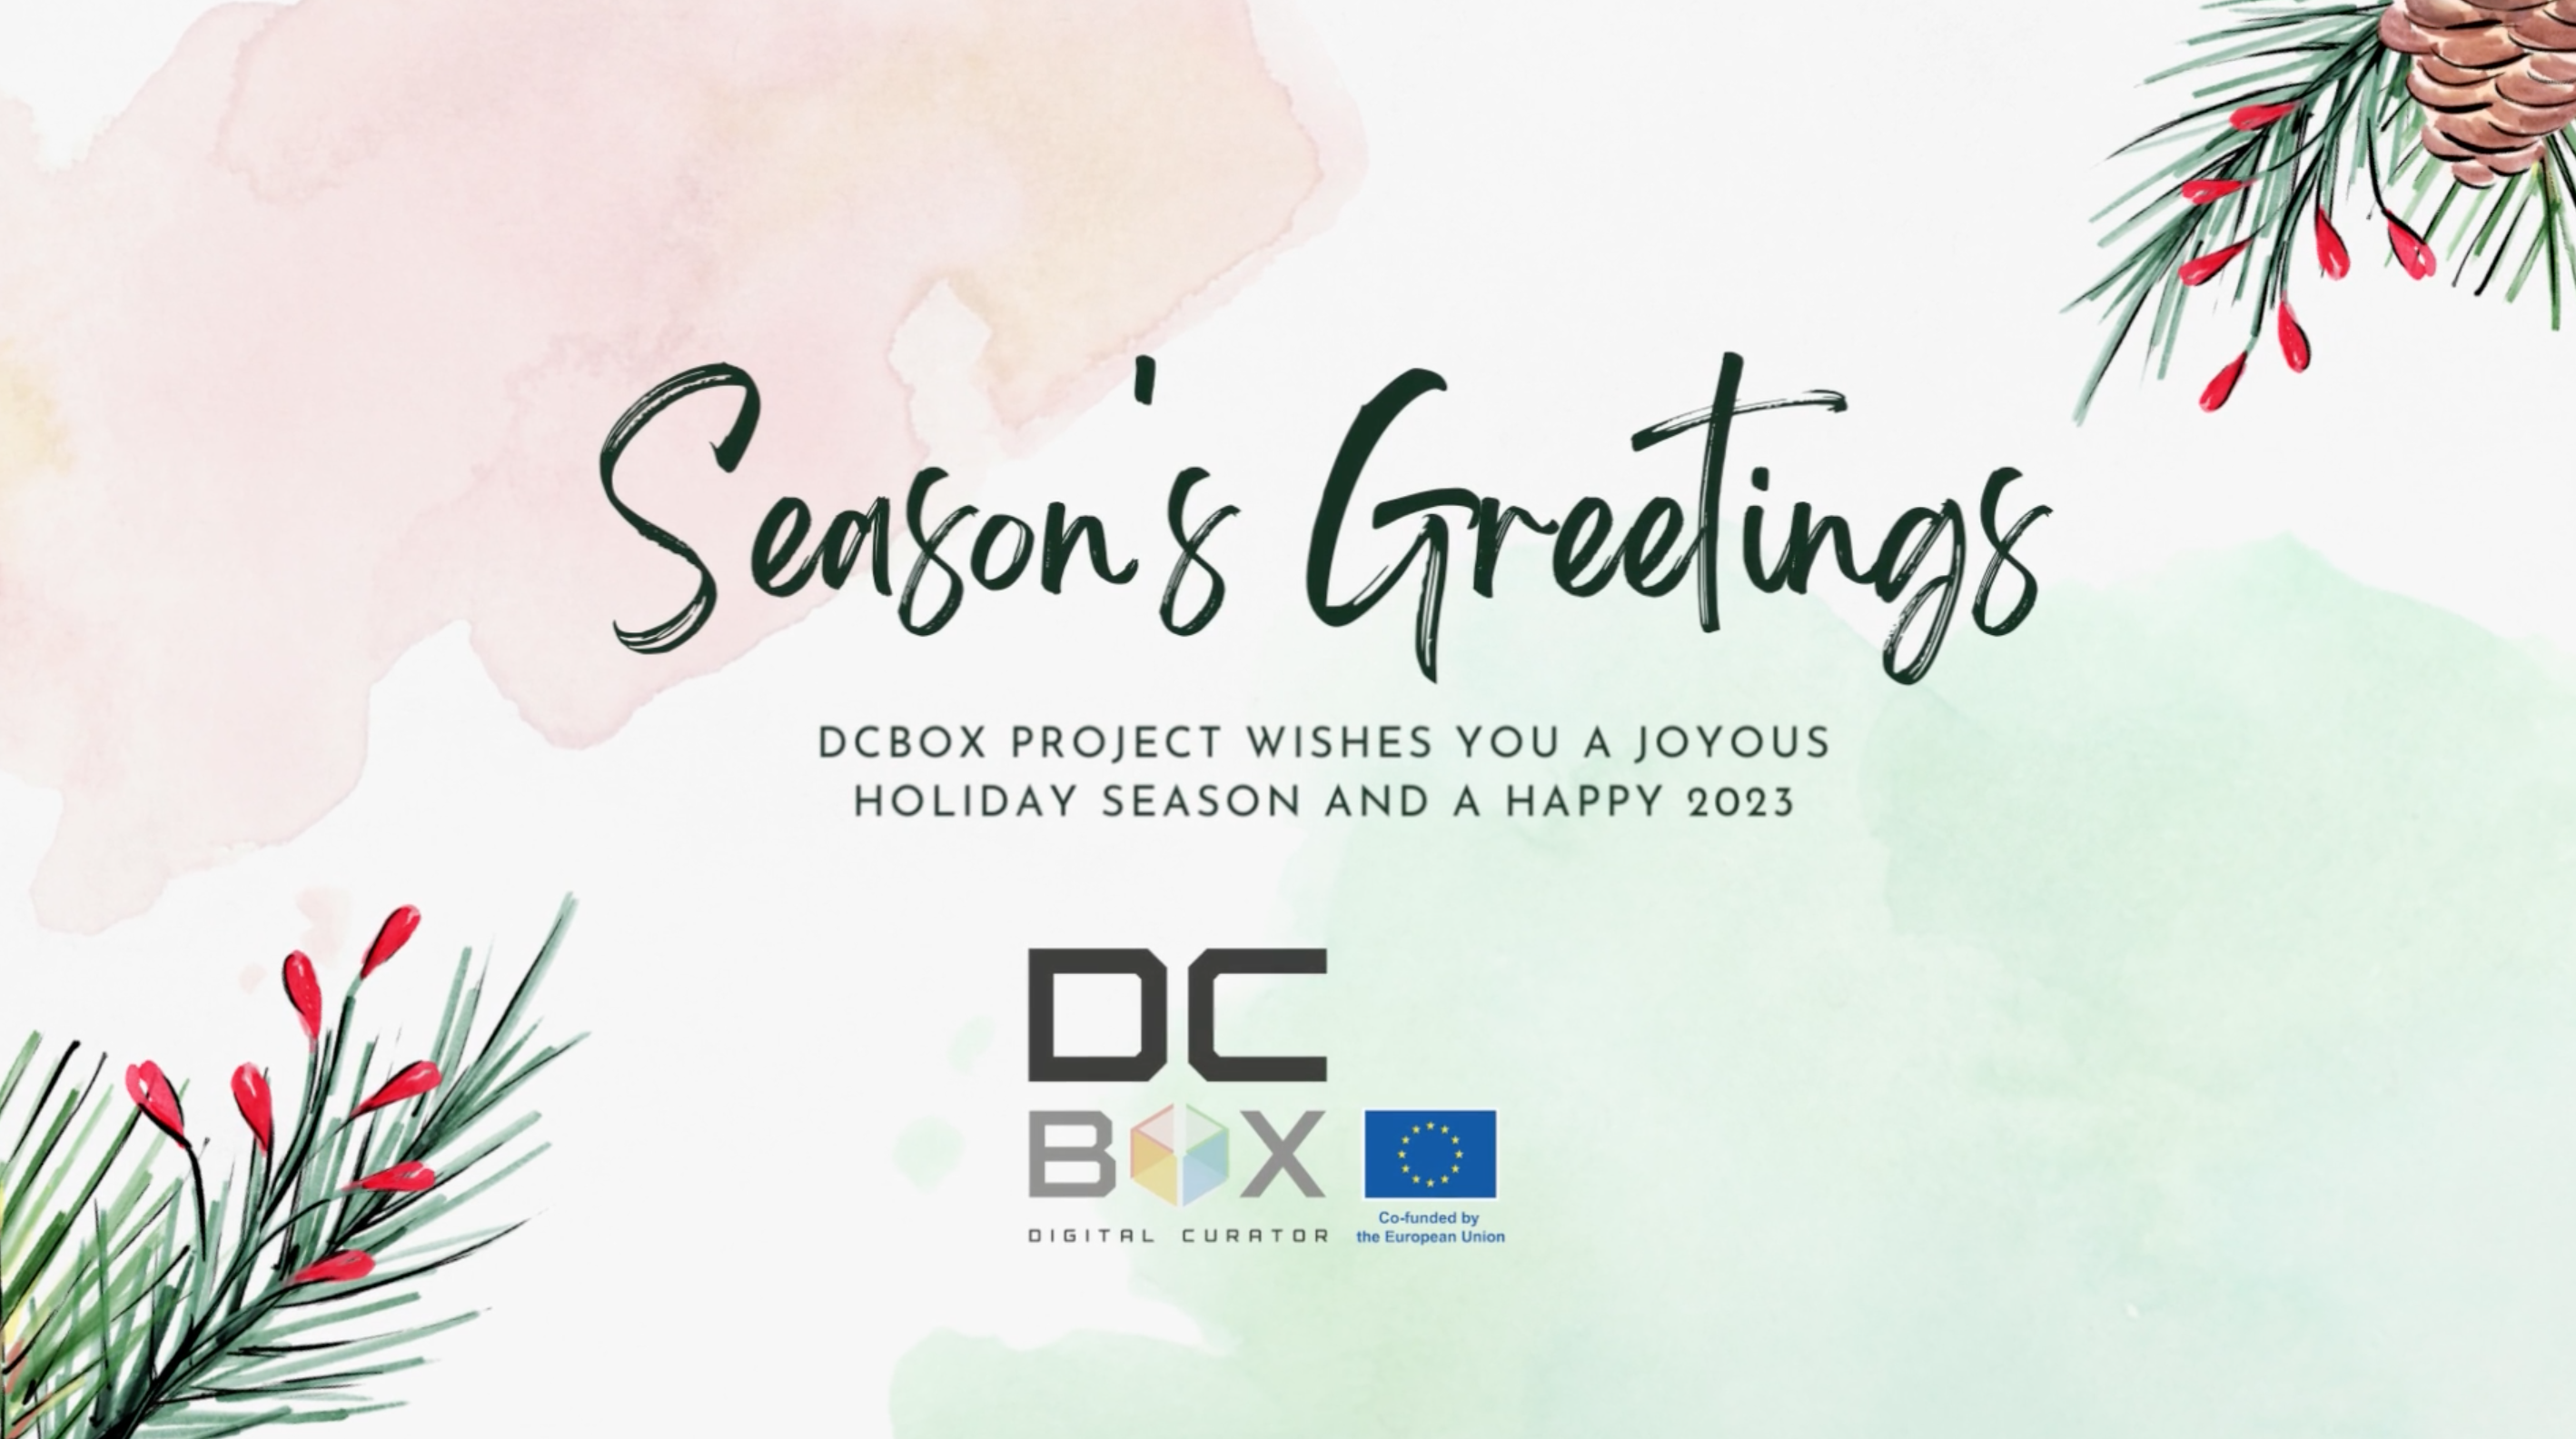 DCbox wishes for the holidays